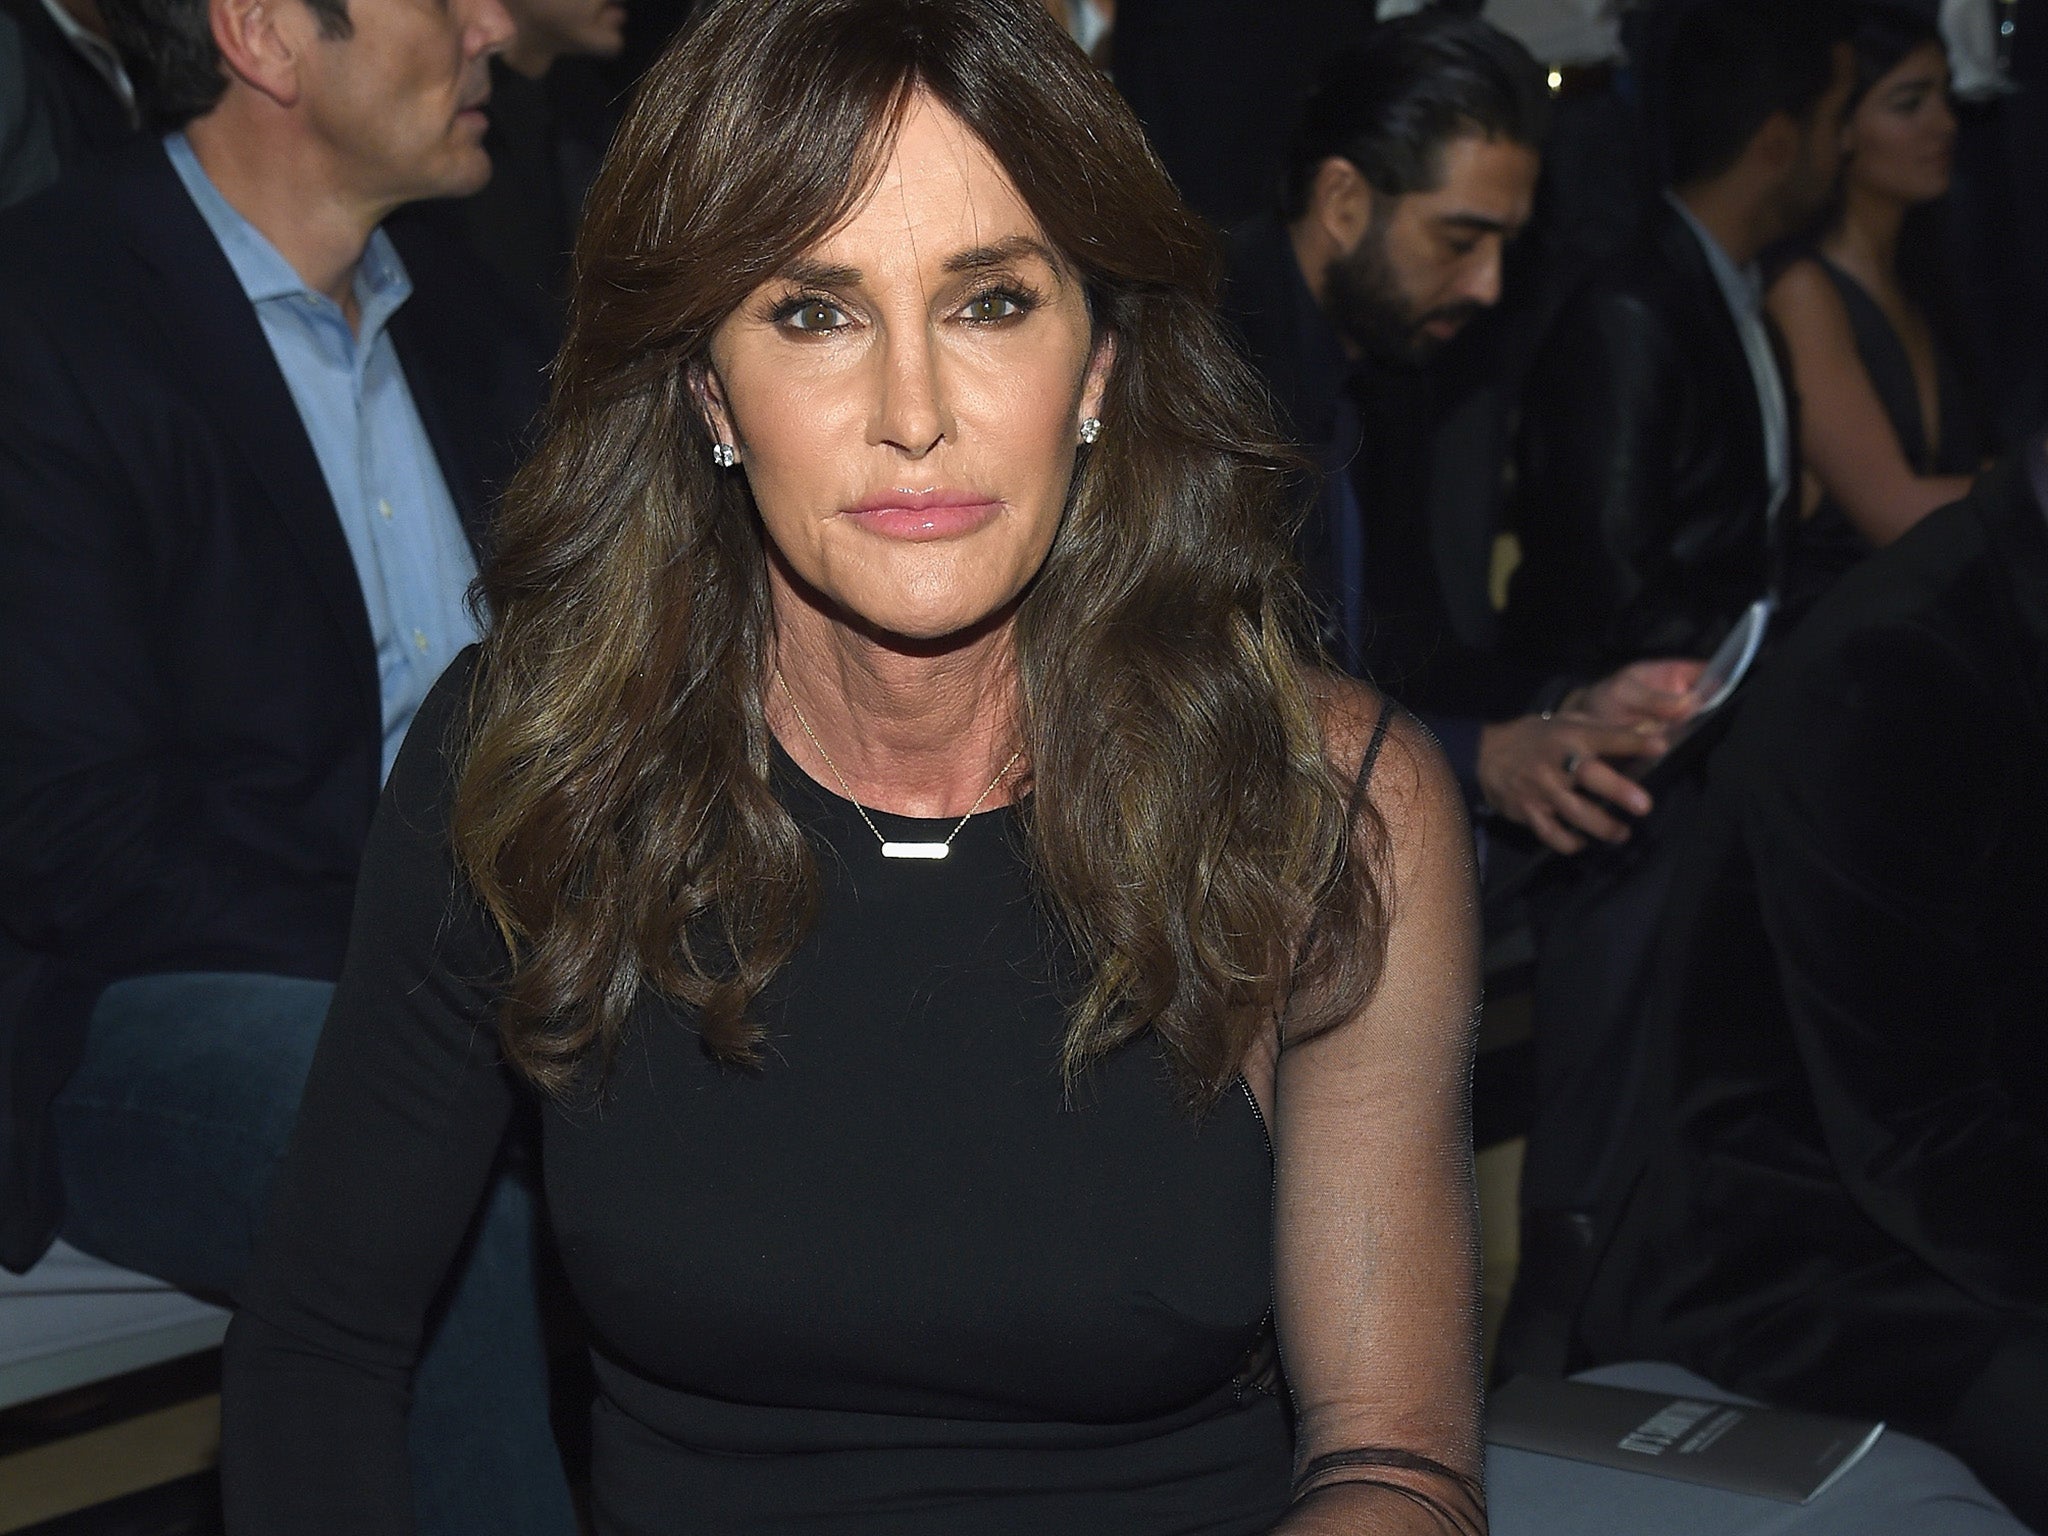 Caitlyn Jenner is often regarded as the most famous transgender person in the world